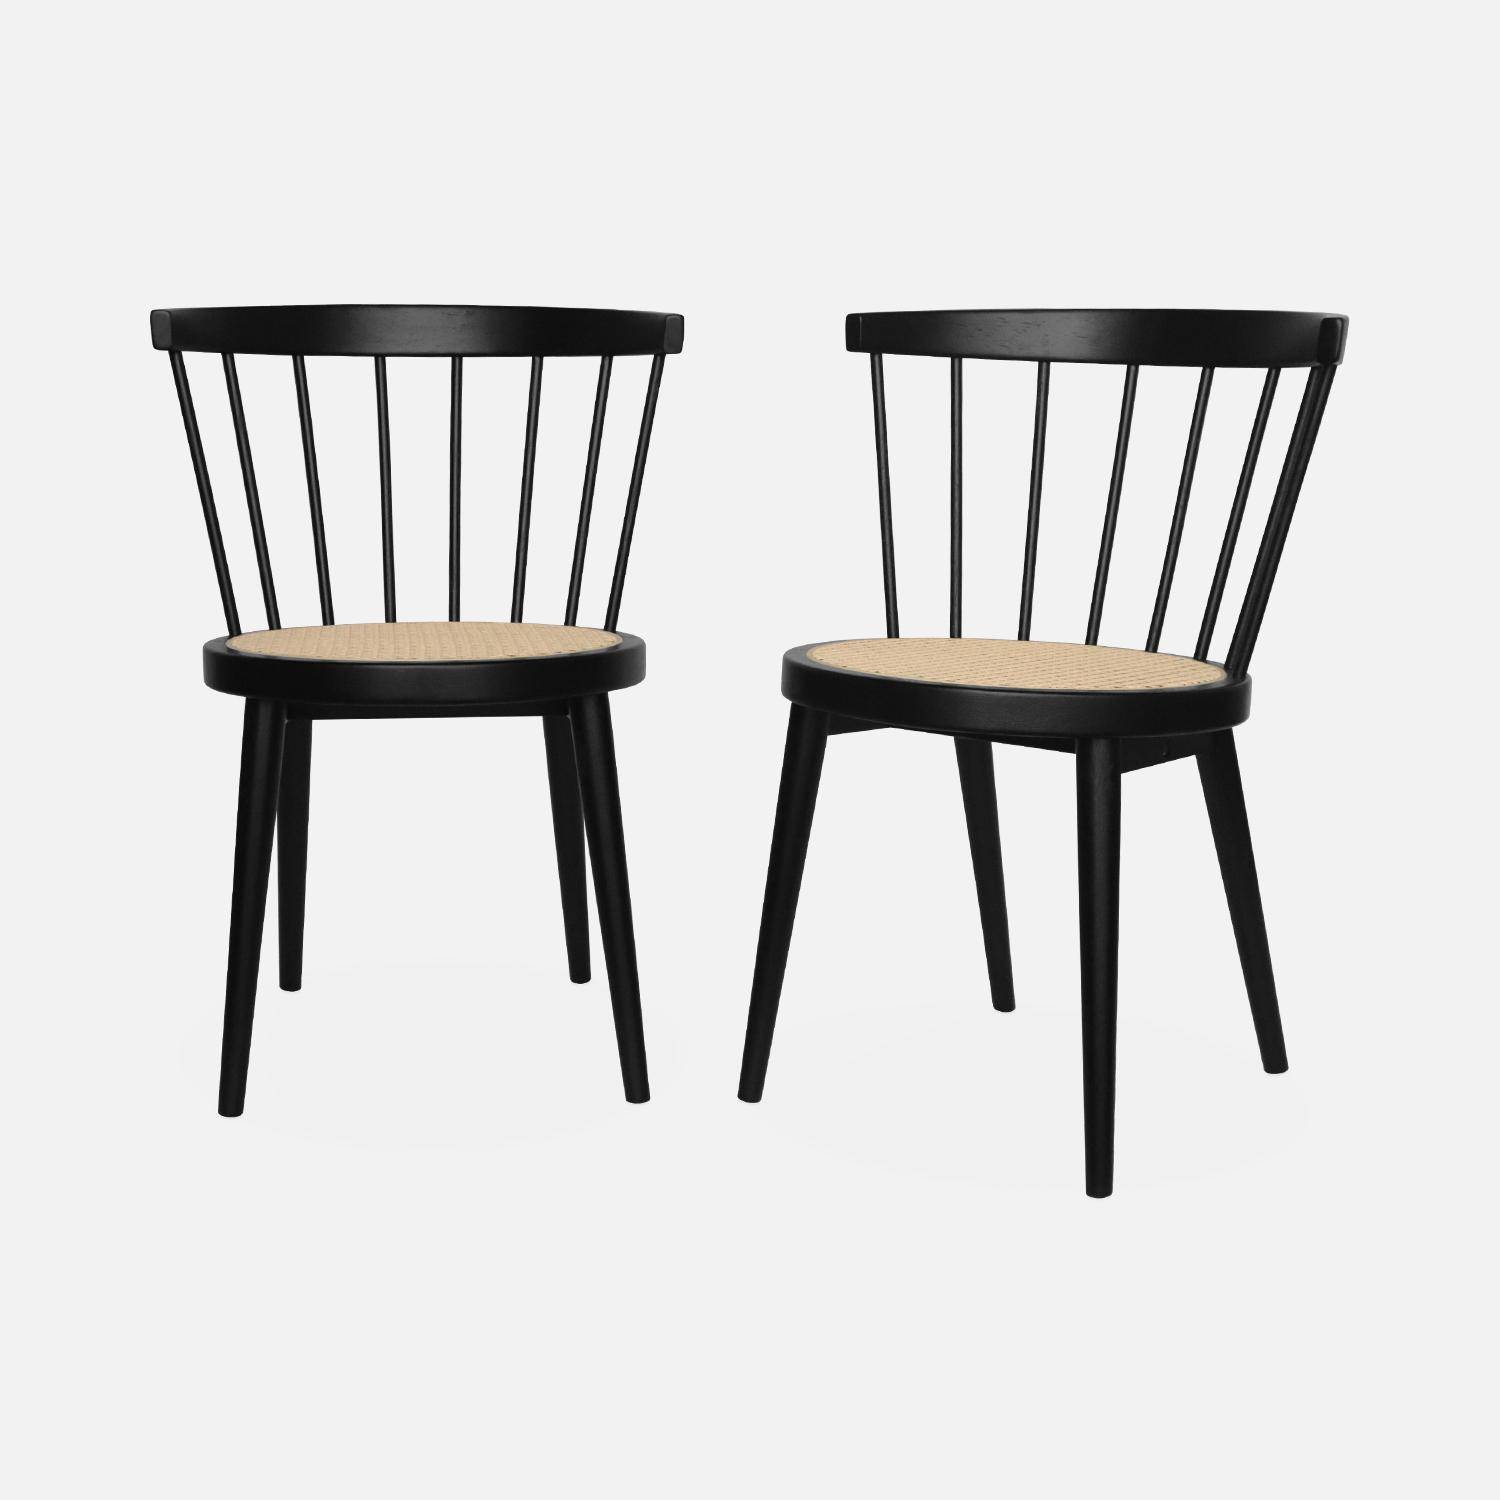 Pair of wood and cane dining chairs, W53 x D53.5 x H76cm, black,sweeek,Photo4